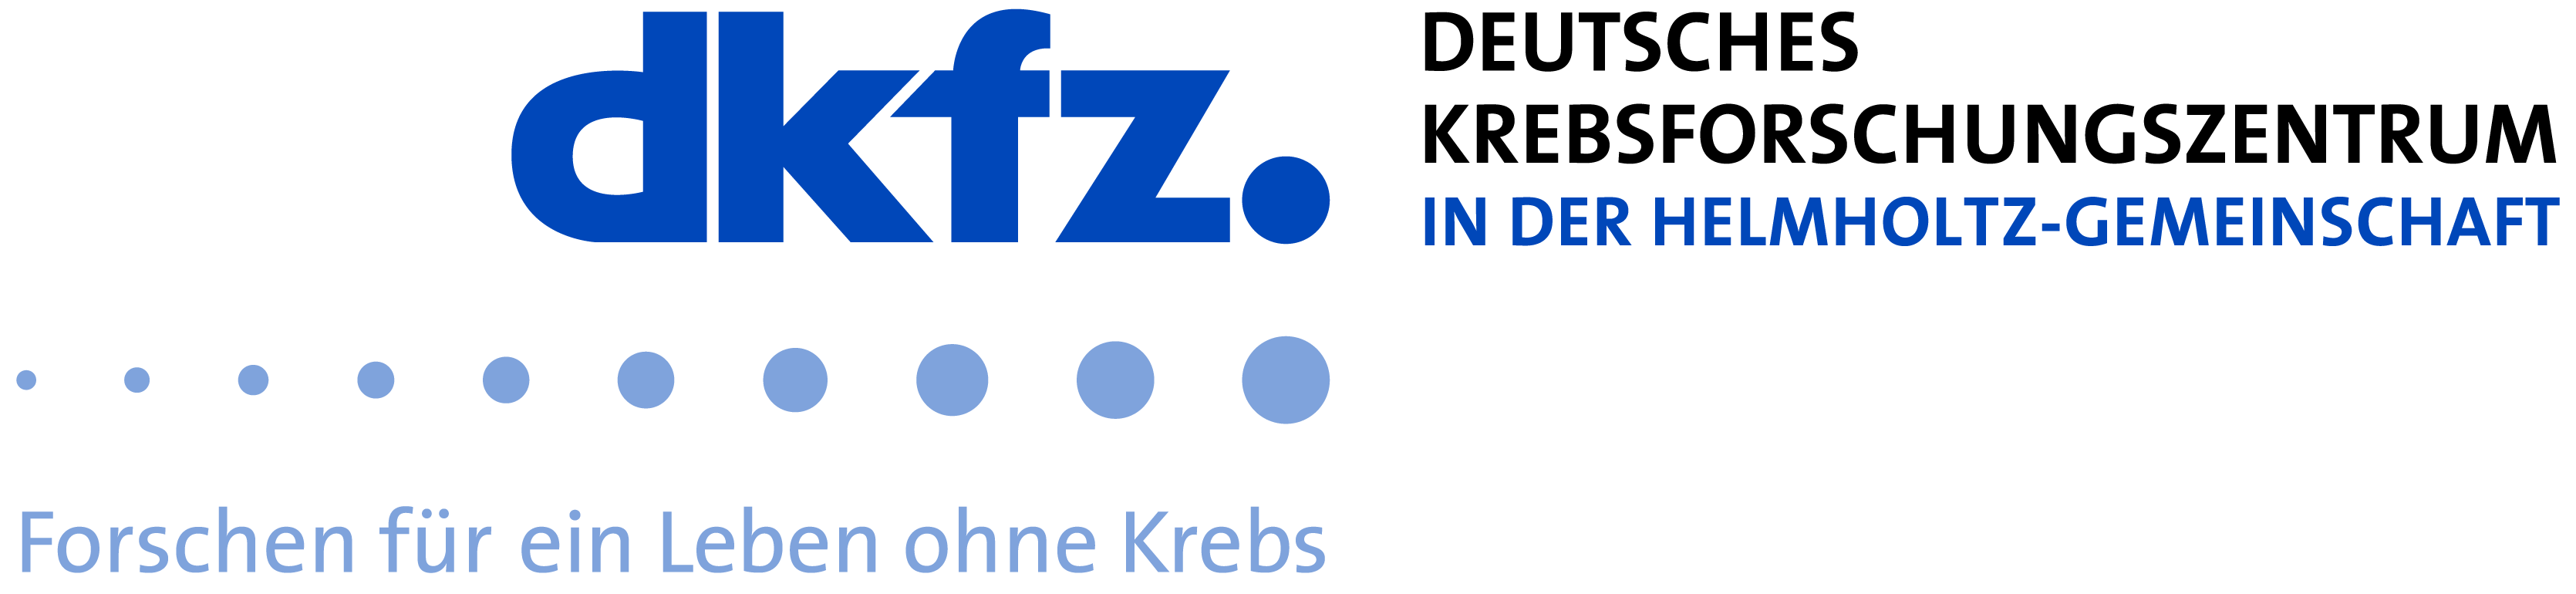 Logo of the German Cancer Research Center